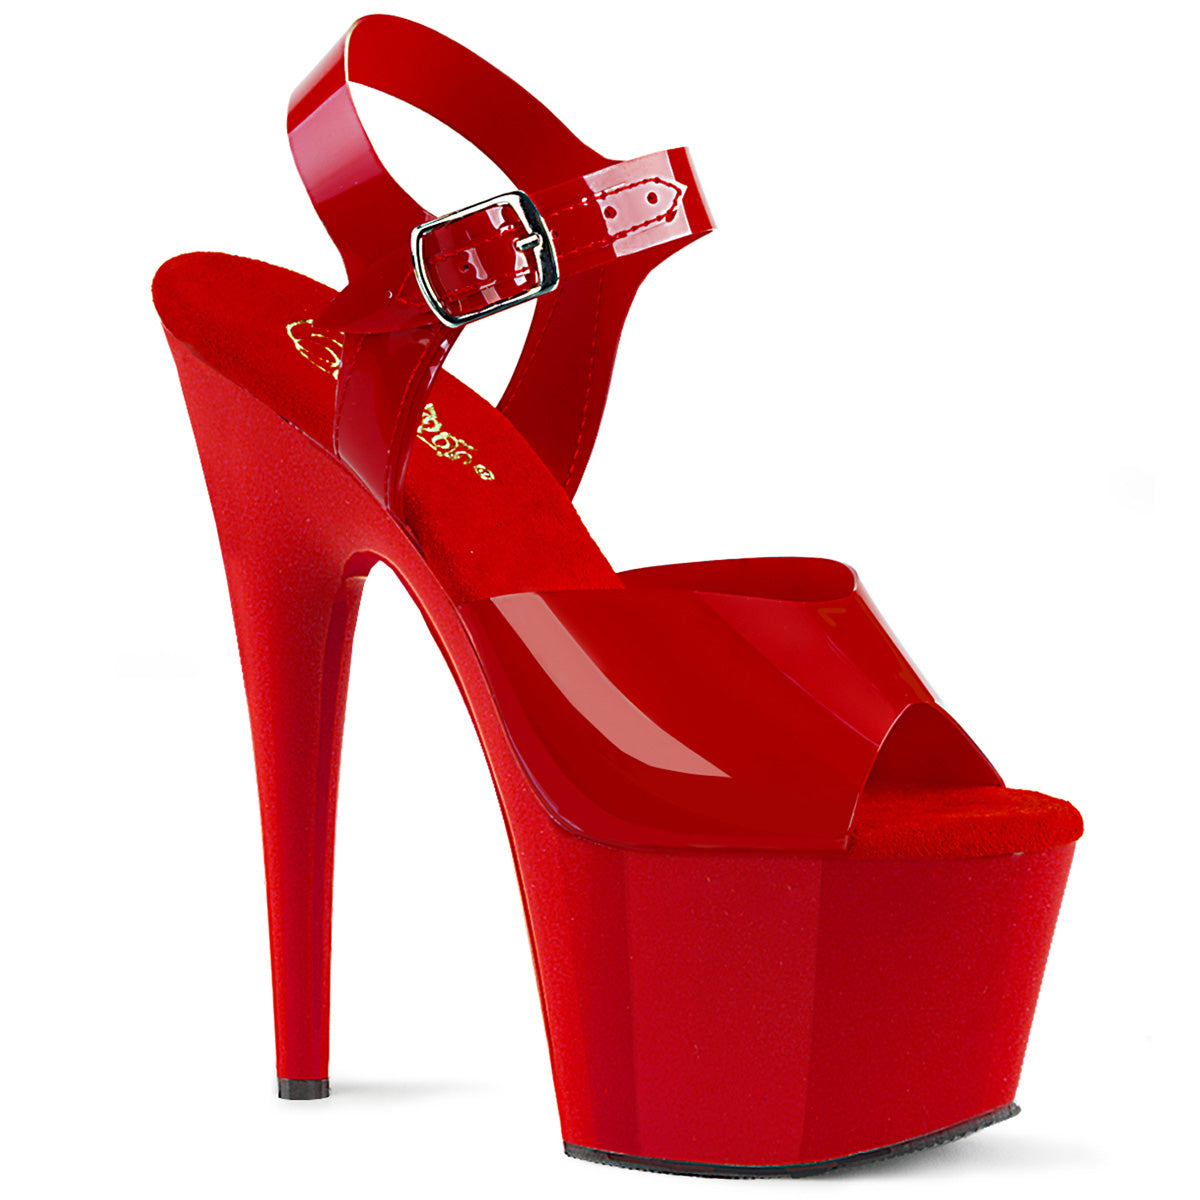 ADORE-708N Pleasers Sexy 7 Inch Heel Red Pole Dancer Shoes